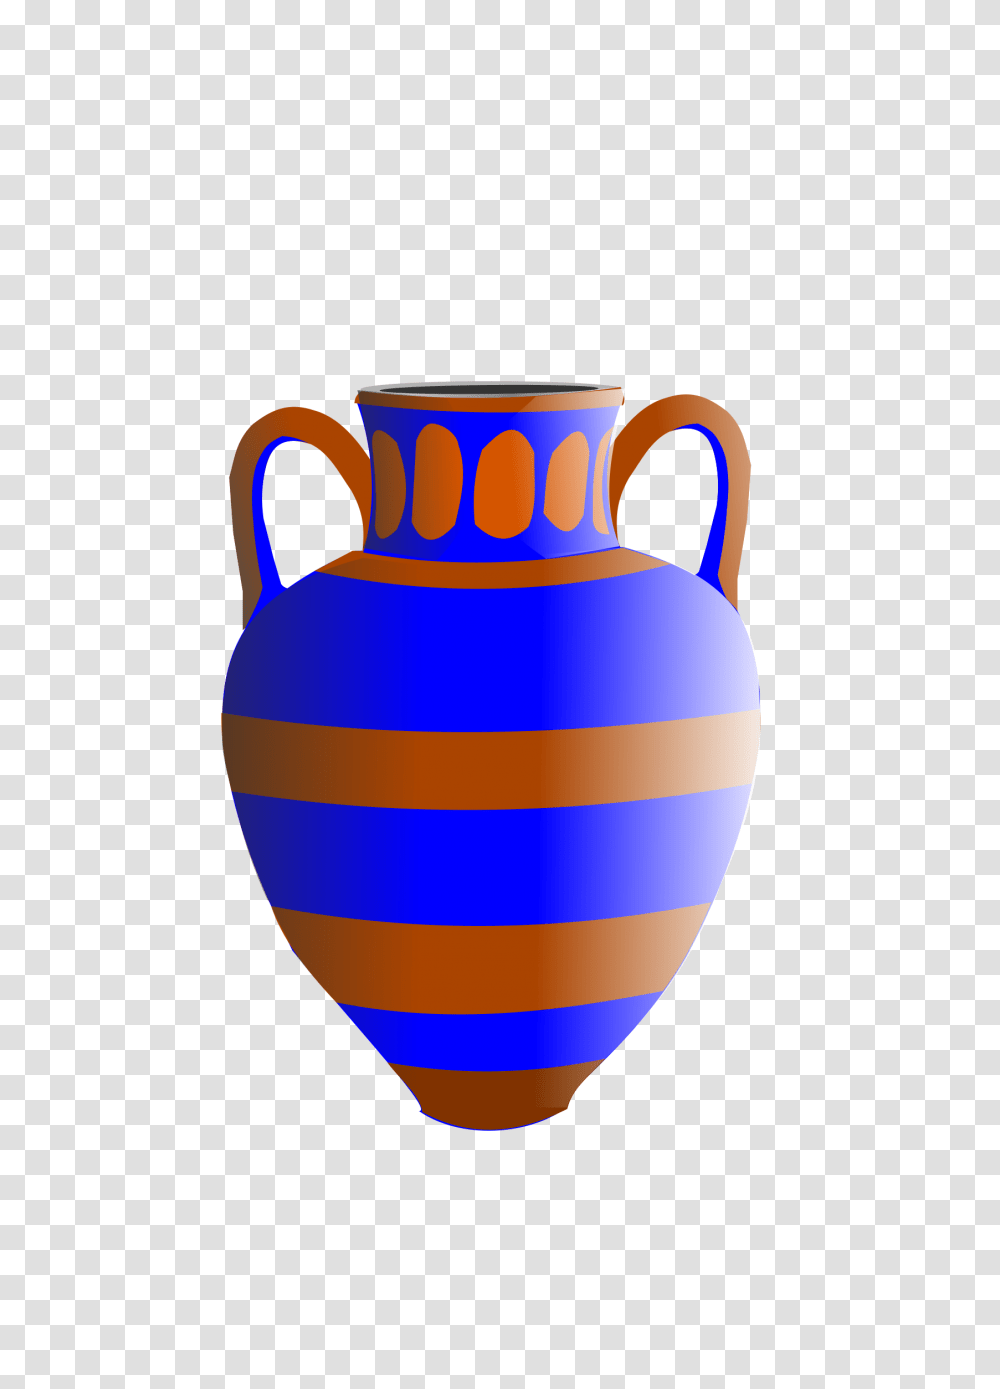 Old Fashioned Vase Blue And Brown Icons, Jar, Pottery, Balloon, Urn Transparent Png